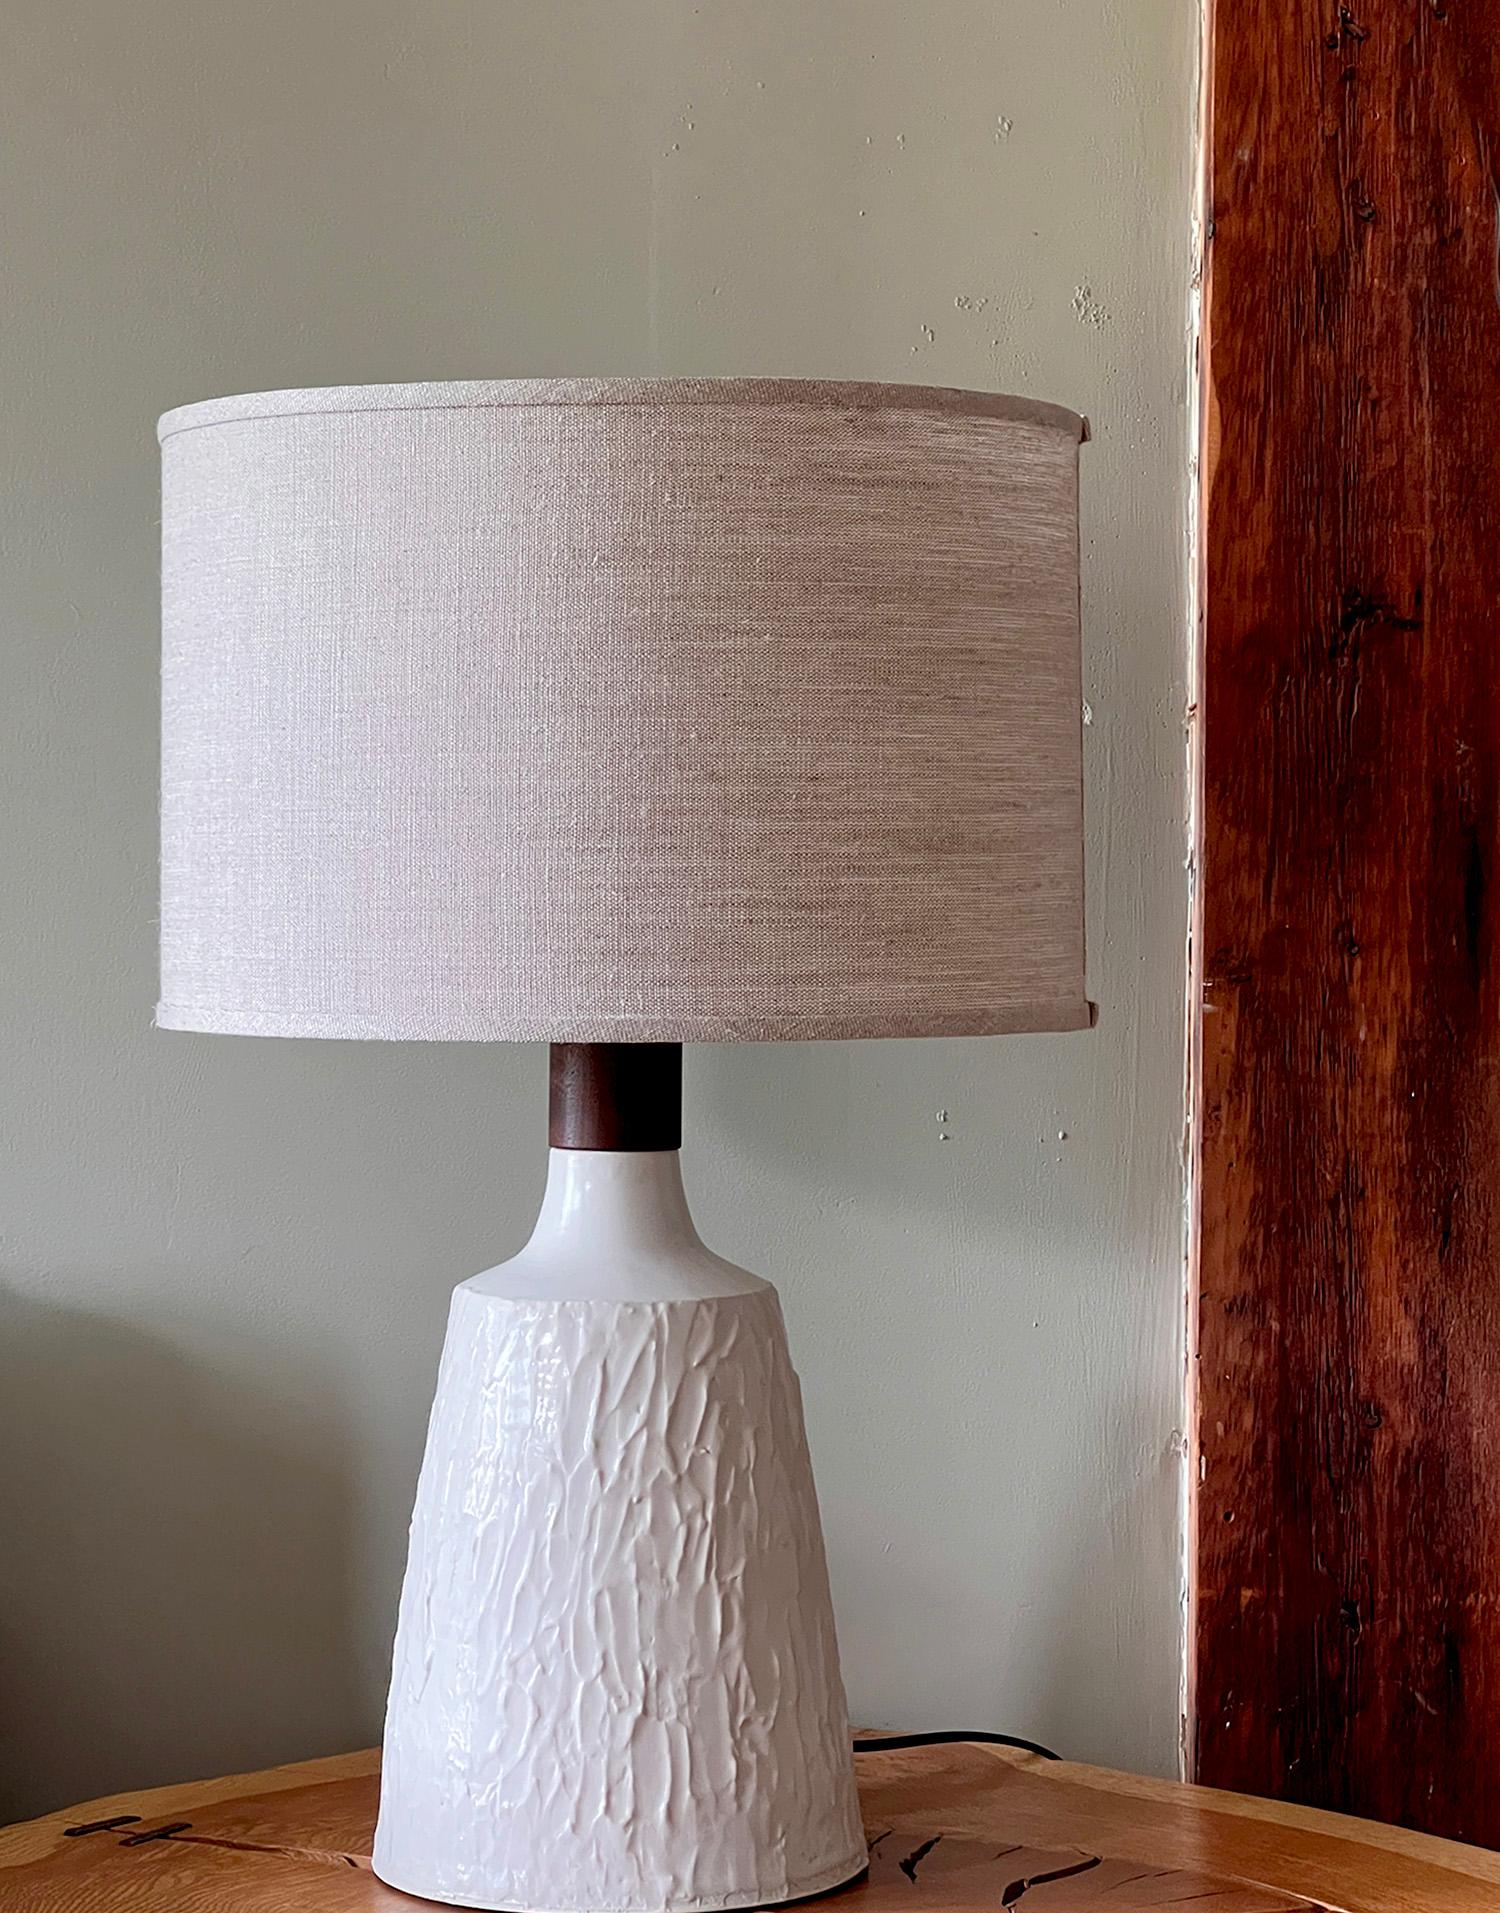 Hand-Crafted One of a Kind Handmade Textured Porcelain and Walnut Table Lamp